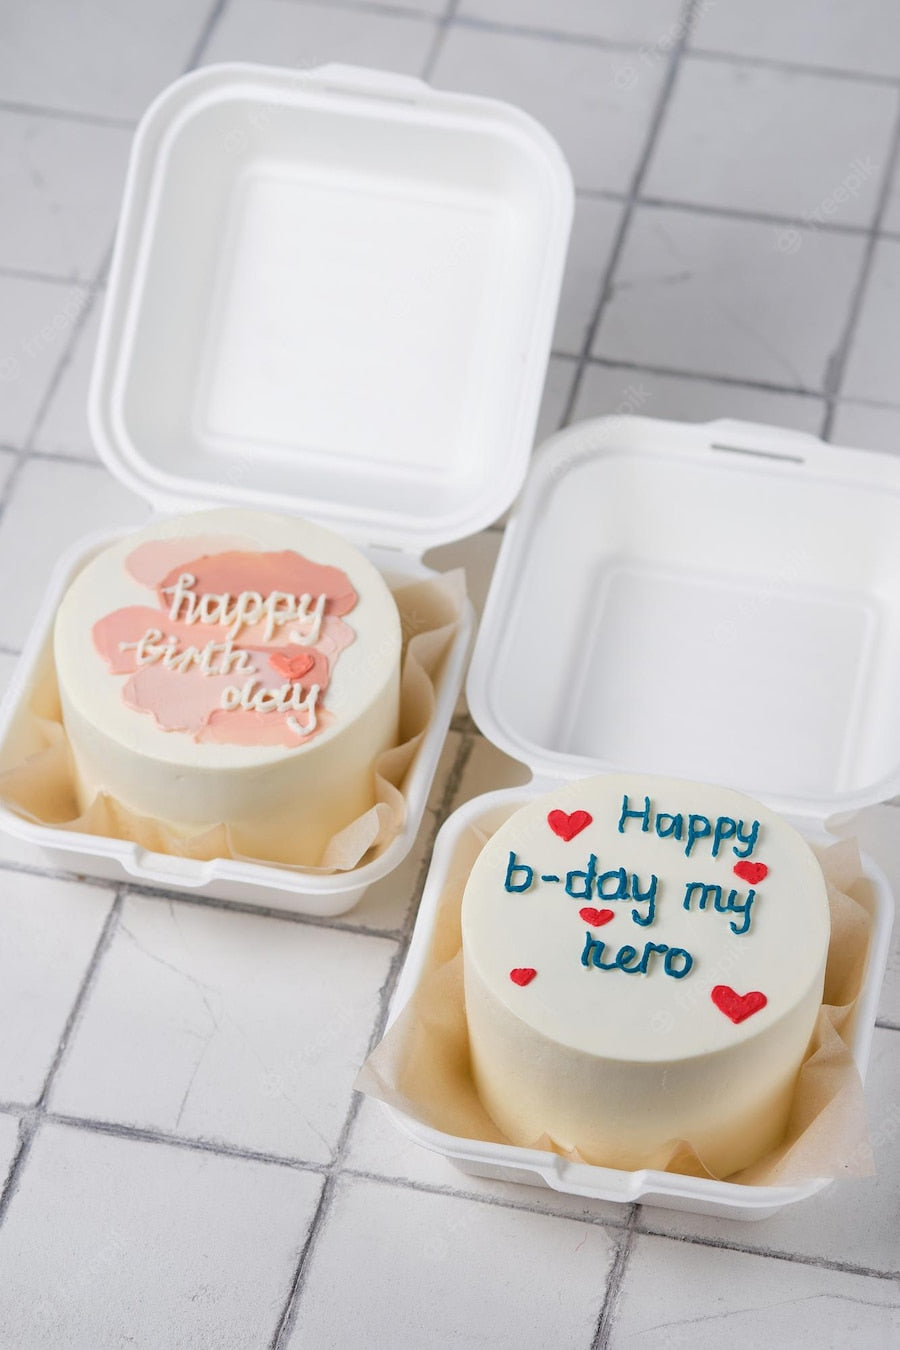 ▷ Rabakes Cakes | Online Birthday Cake Delivery London | Cupcake Delivery  London, Hounslow